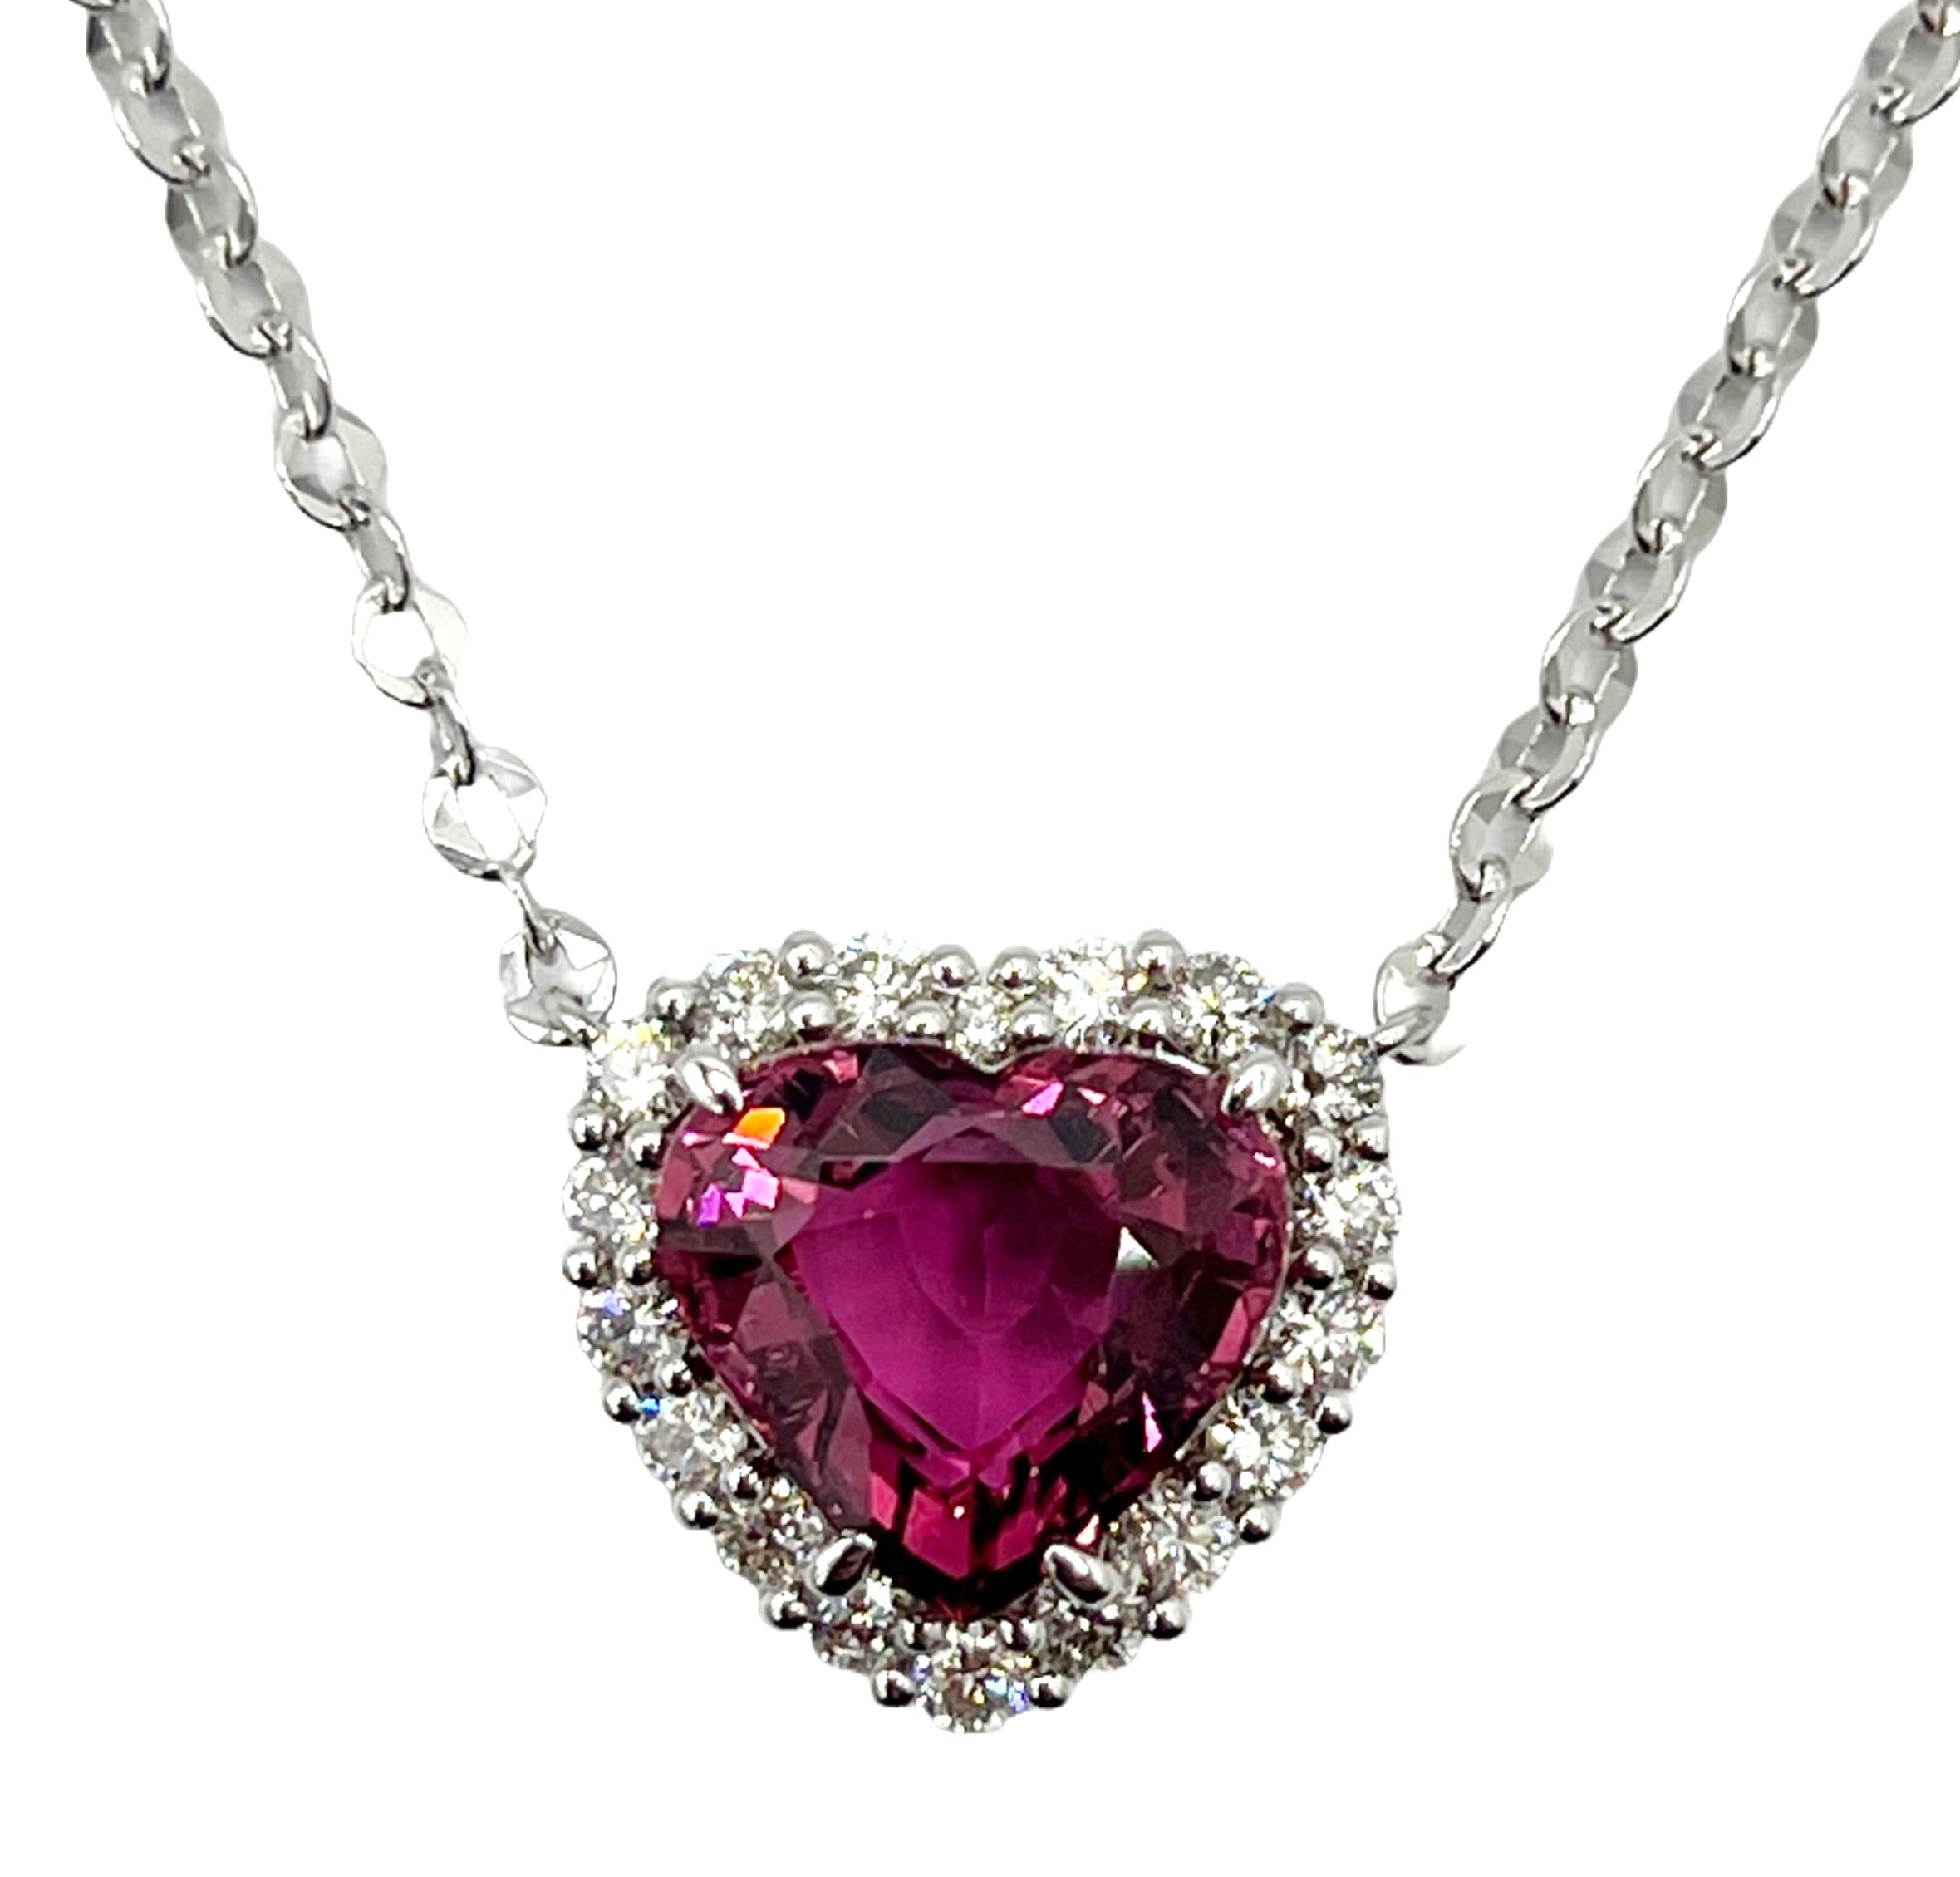 Necklace 18KW/2.4G 1TOUR-4.21CT 18RD-0.57CT